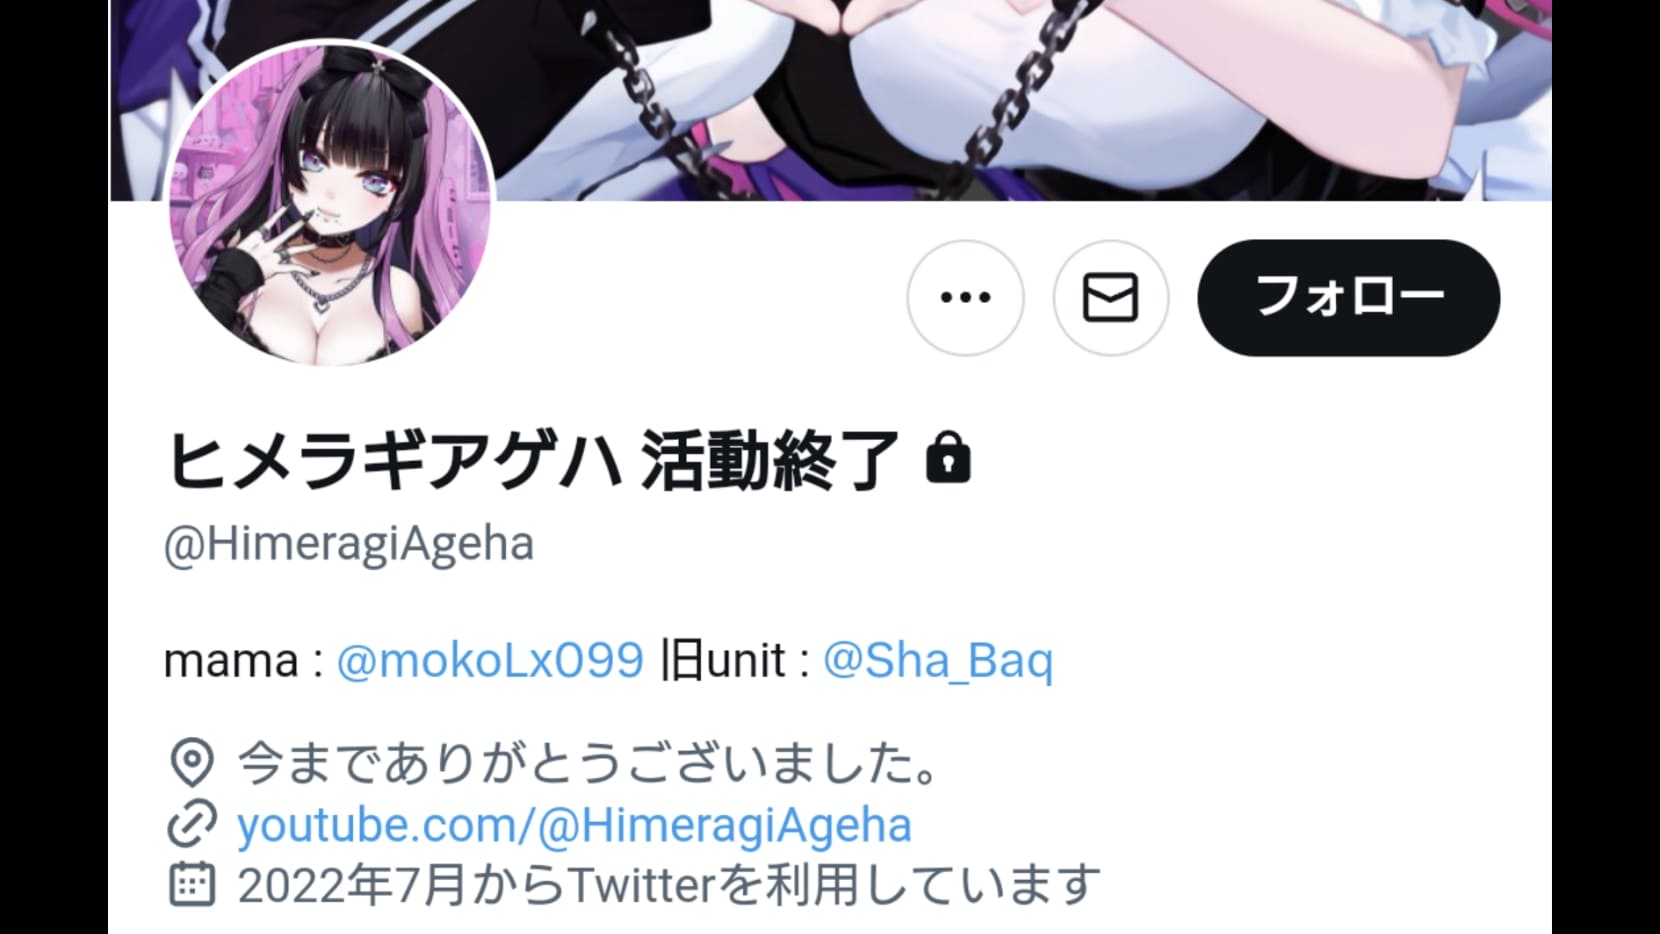 WACTOR Production (910inc) “Terminated” VTuber Himeragi Ageha who Accused of Being Treated Unfairly?